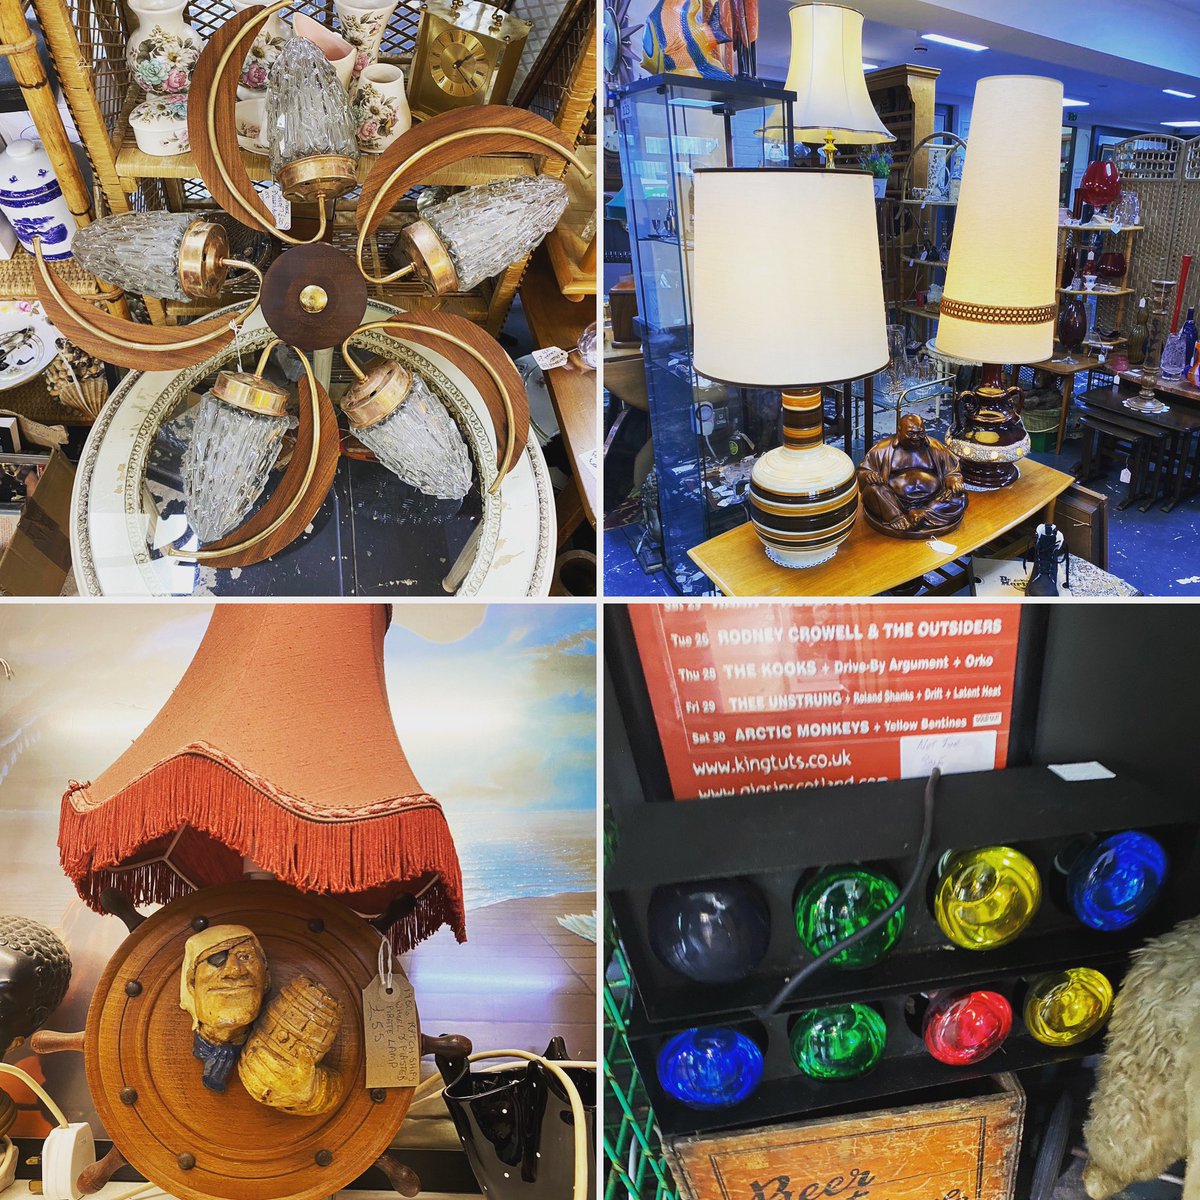 Just a small selection of the lighting available from various dealers around the centre. Come and see for yourself 10am-5pm #astraantiquescentre #hemswell #lincolnshire #retrolighting #midcenturylamps #midcenturylighting #discolights #outdoorparty #retroceilinglight #funky